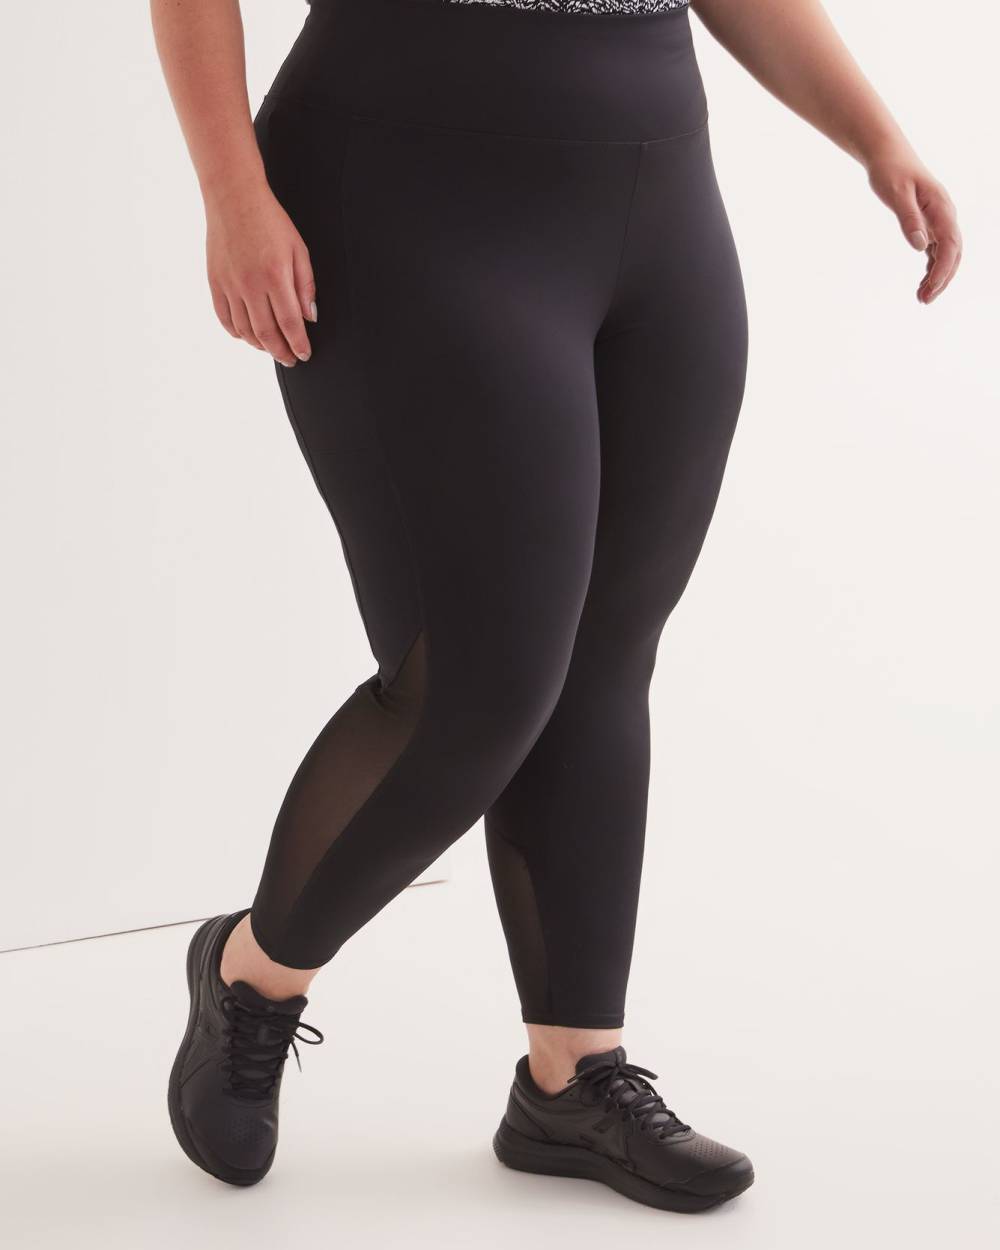 Responsible, High-Waisted Legging with Side Pockets and Mesh